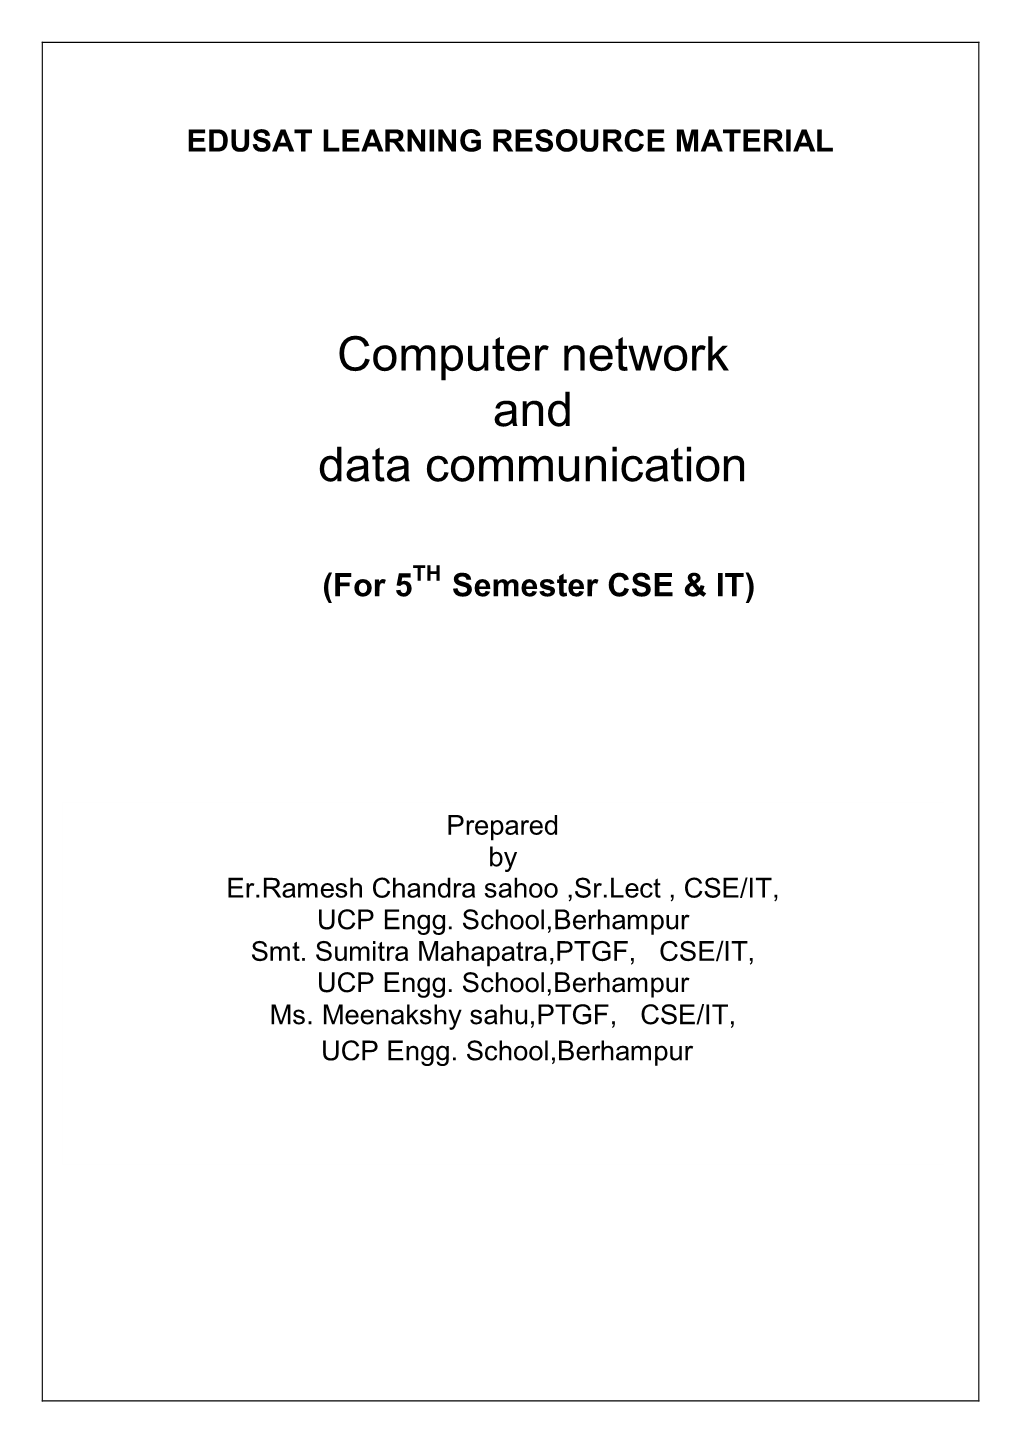 Computer Network and Data Communication